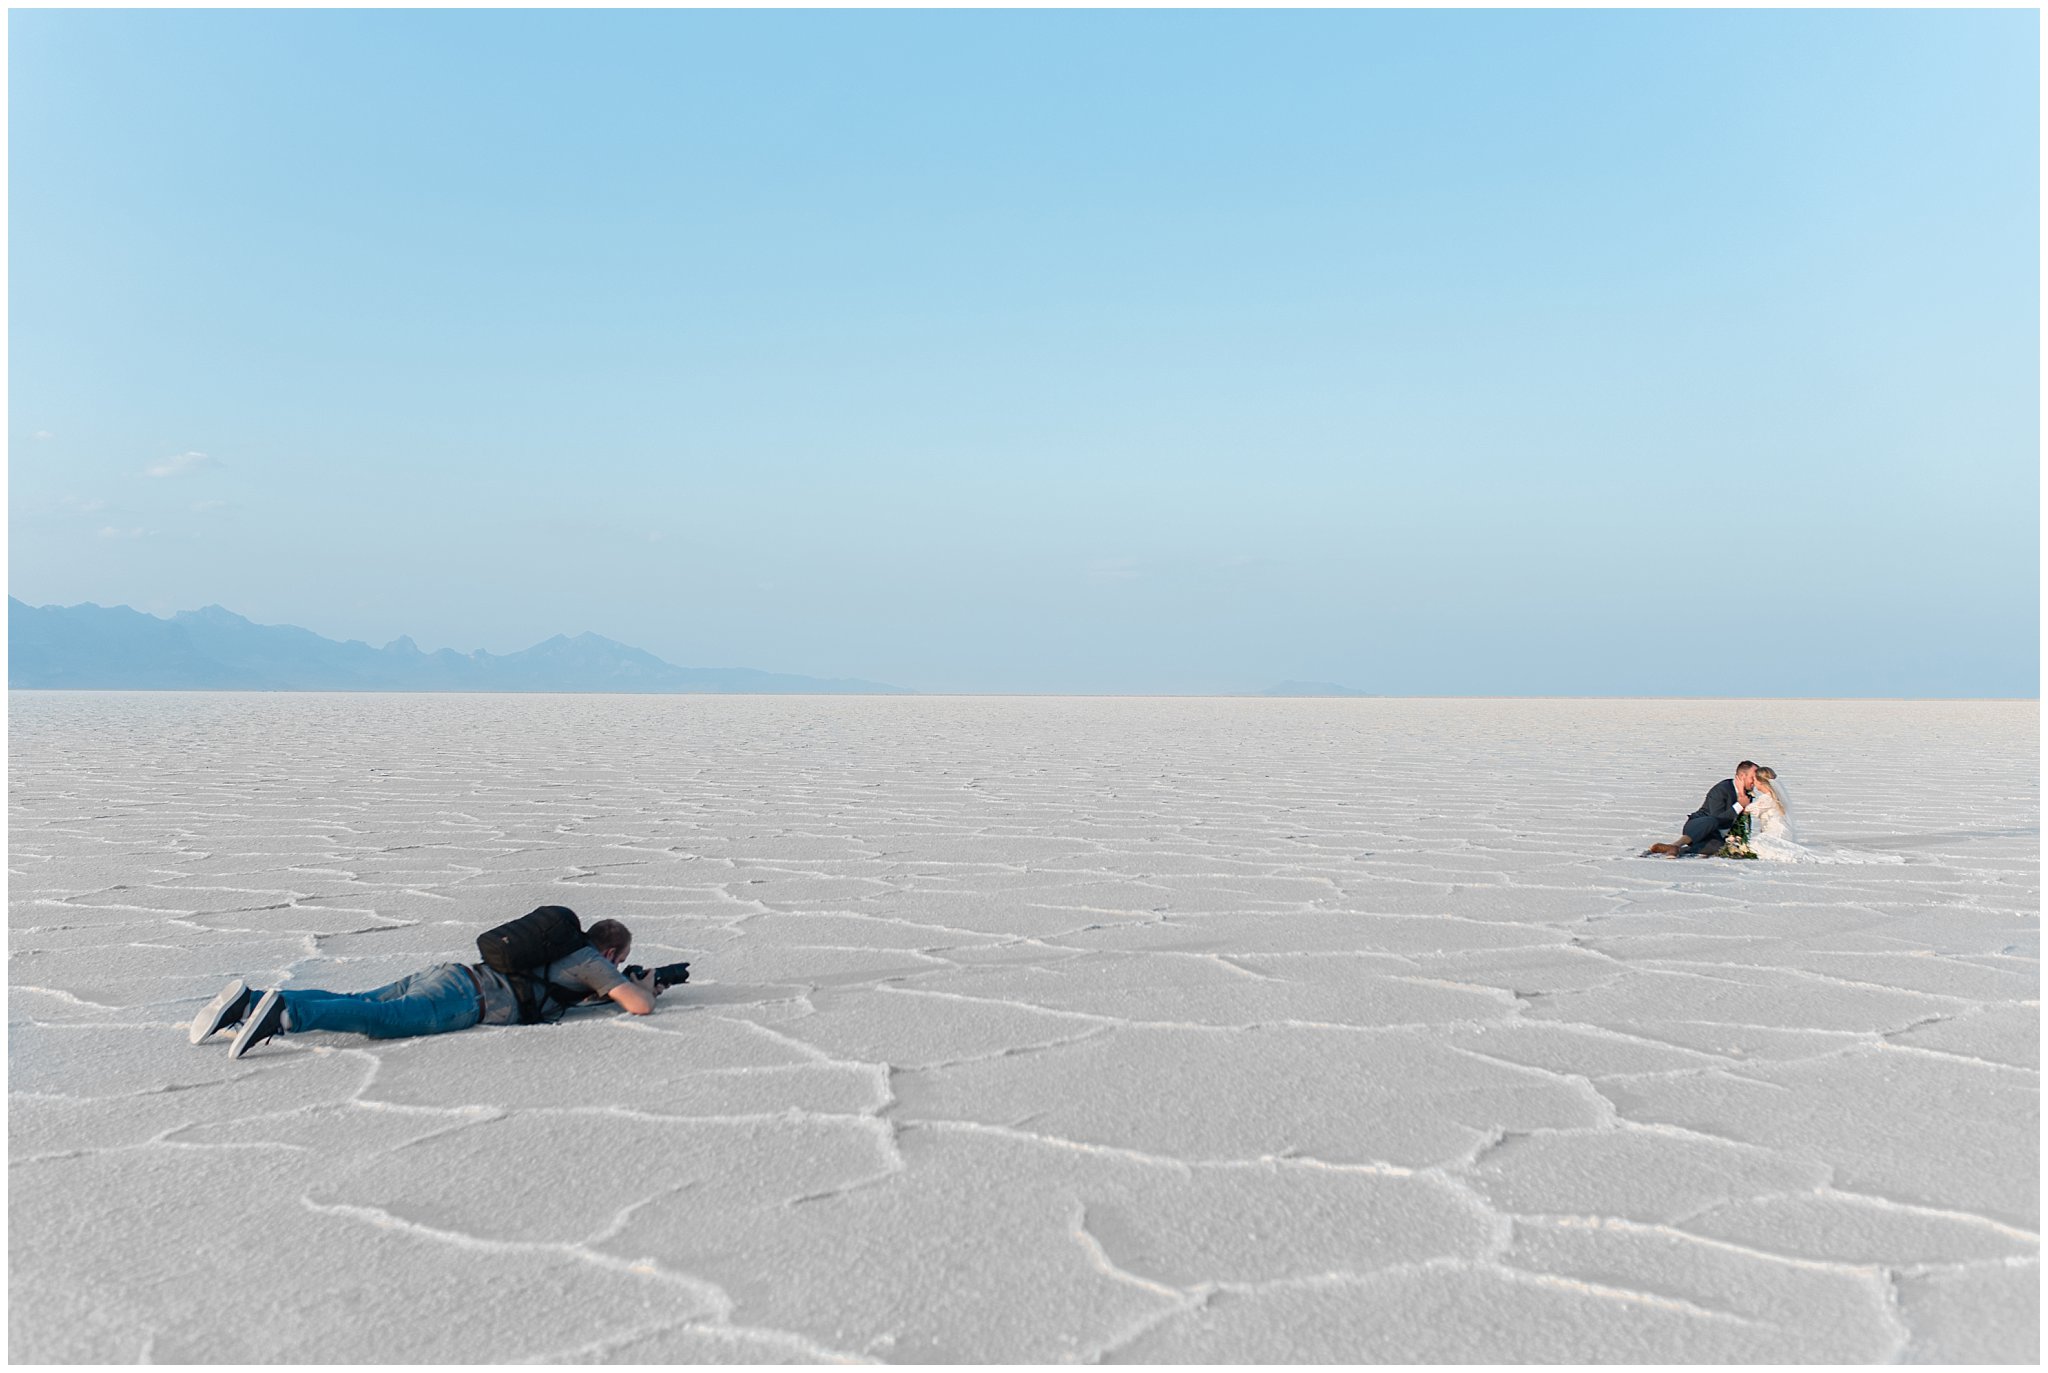 Dallin laying on the Salt Flats for photo